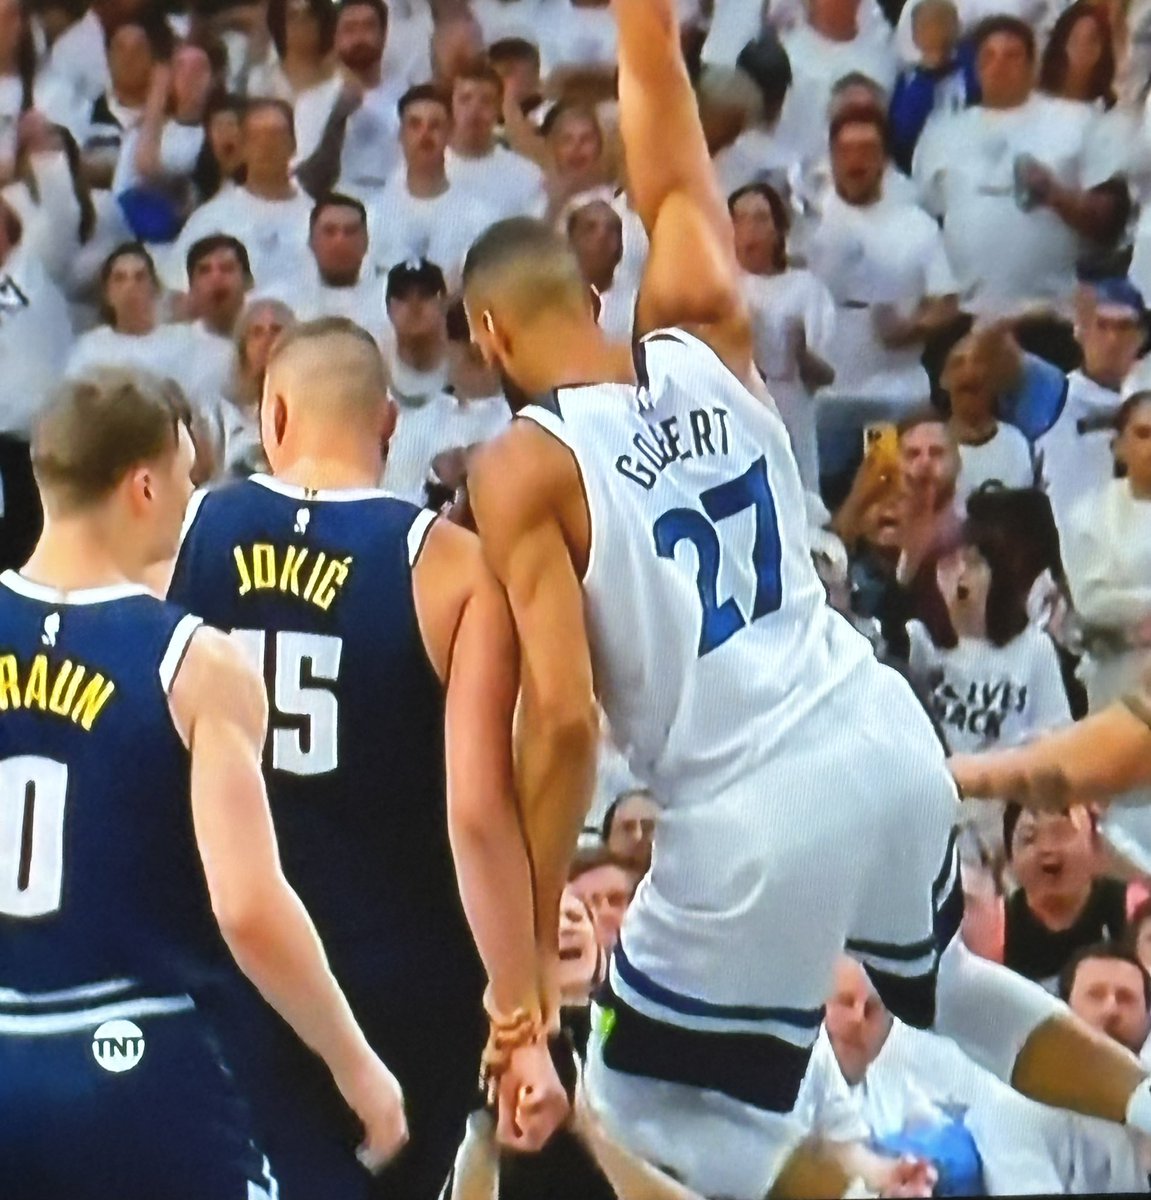 Gobert gets to just grab Jokic’s wrist when he goes up to dunk? Cool… 🤦‍♂️

#NuggetsNation #WolvesBack #NBA #OfficialNBARefs